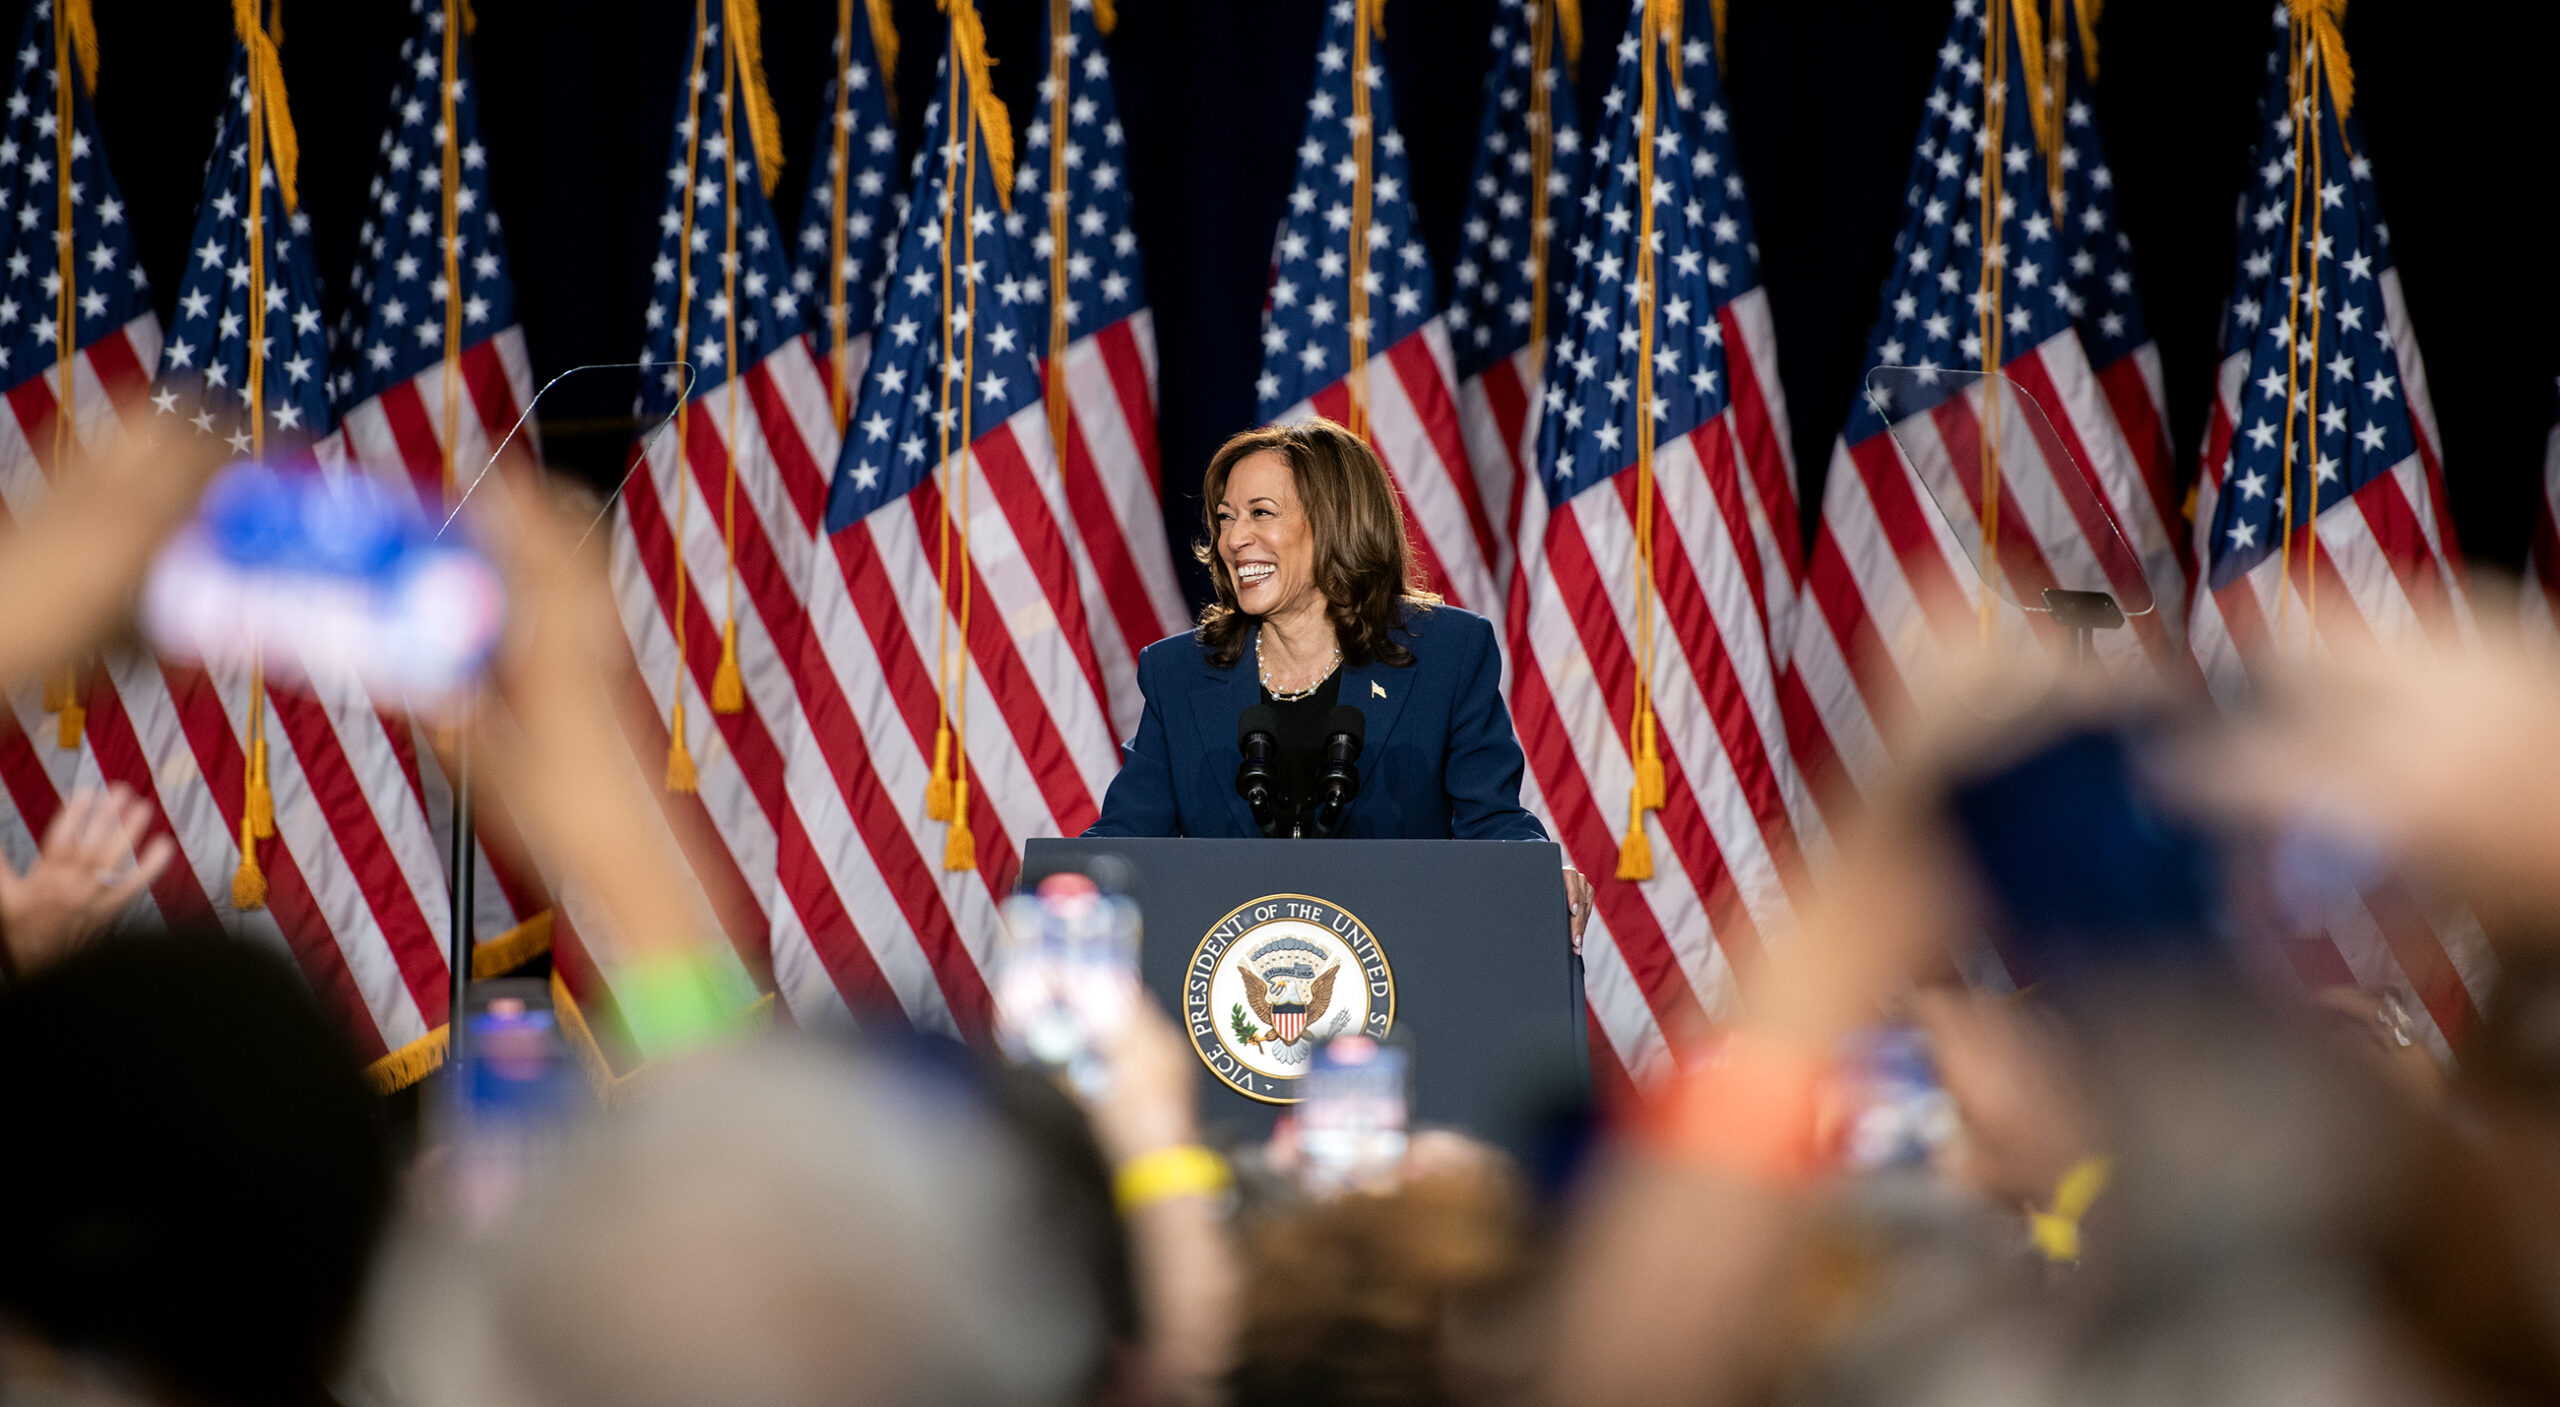 With Biden out of the race, what happens next in the Democratic nomination process?